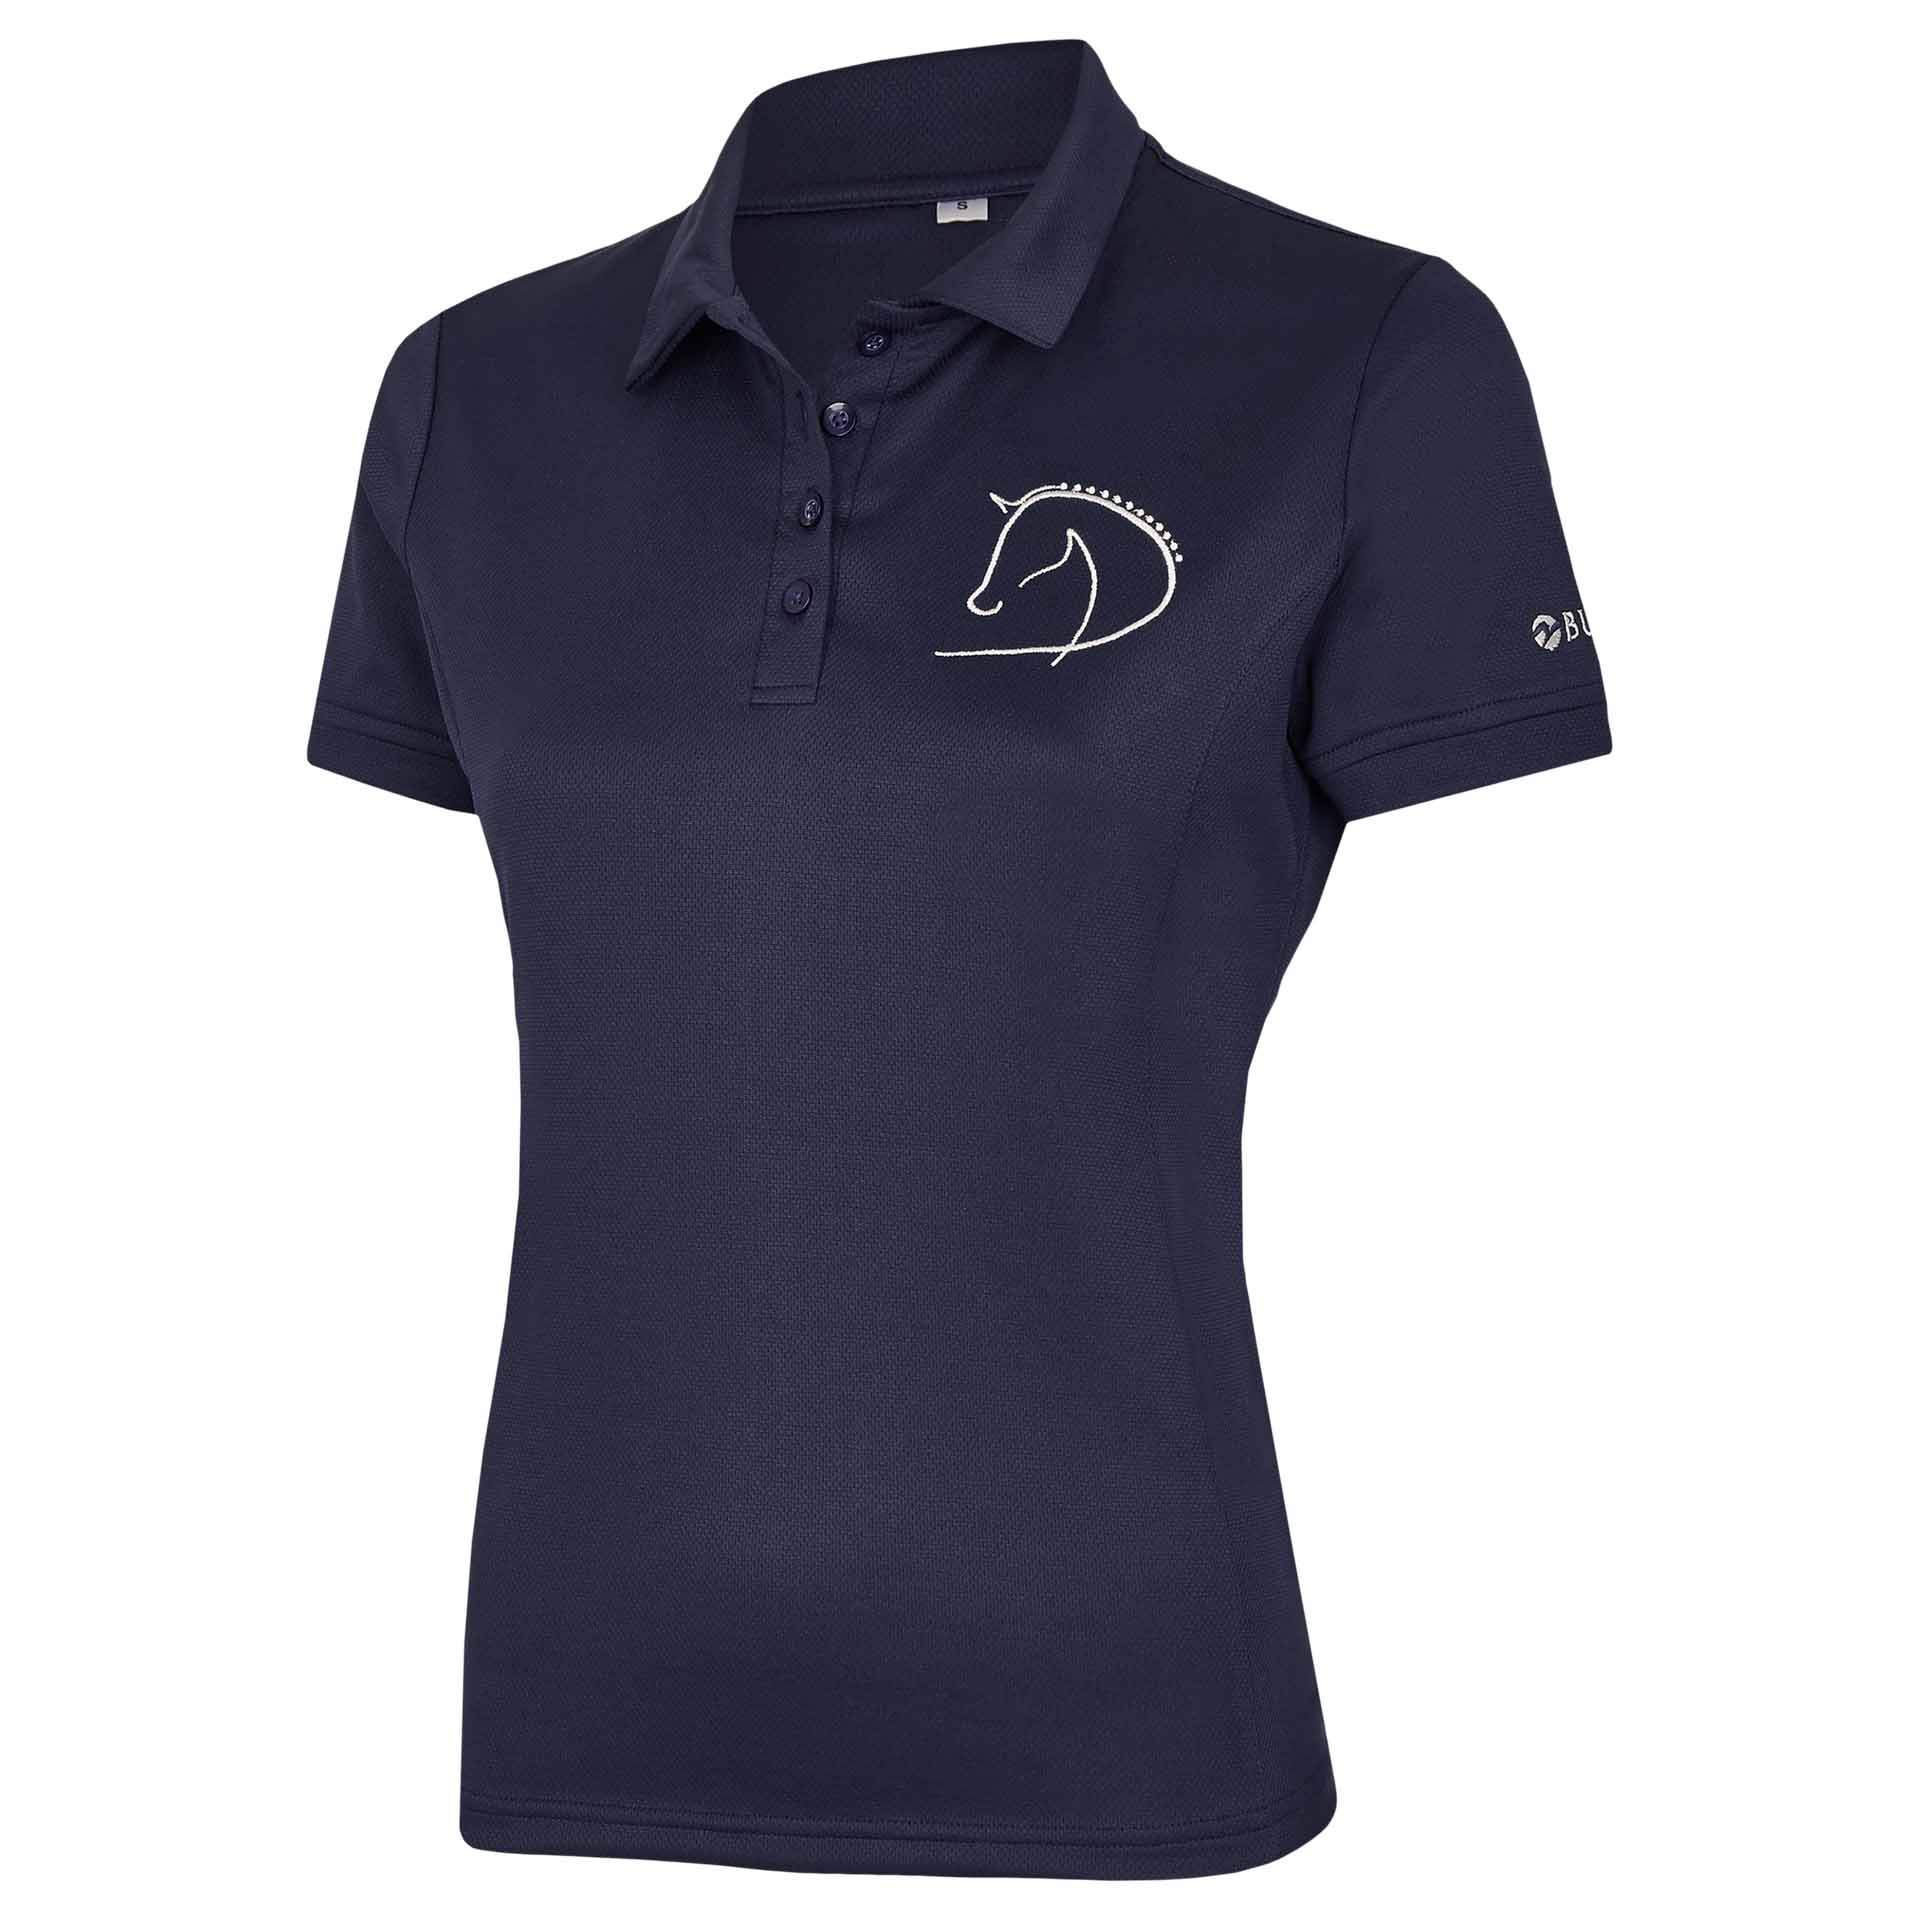 BUSSE Polo-Shirt CREW S navy